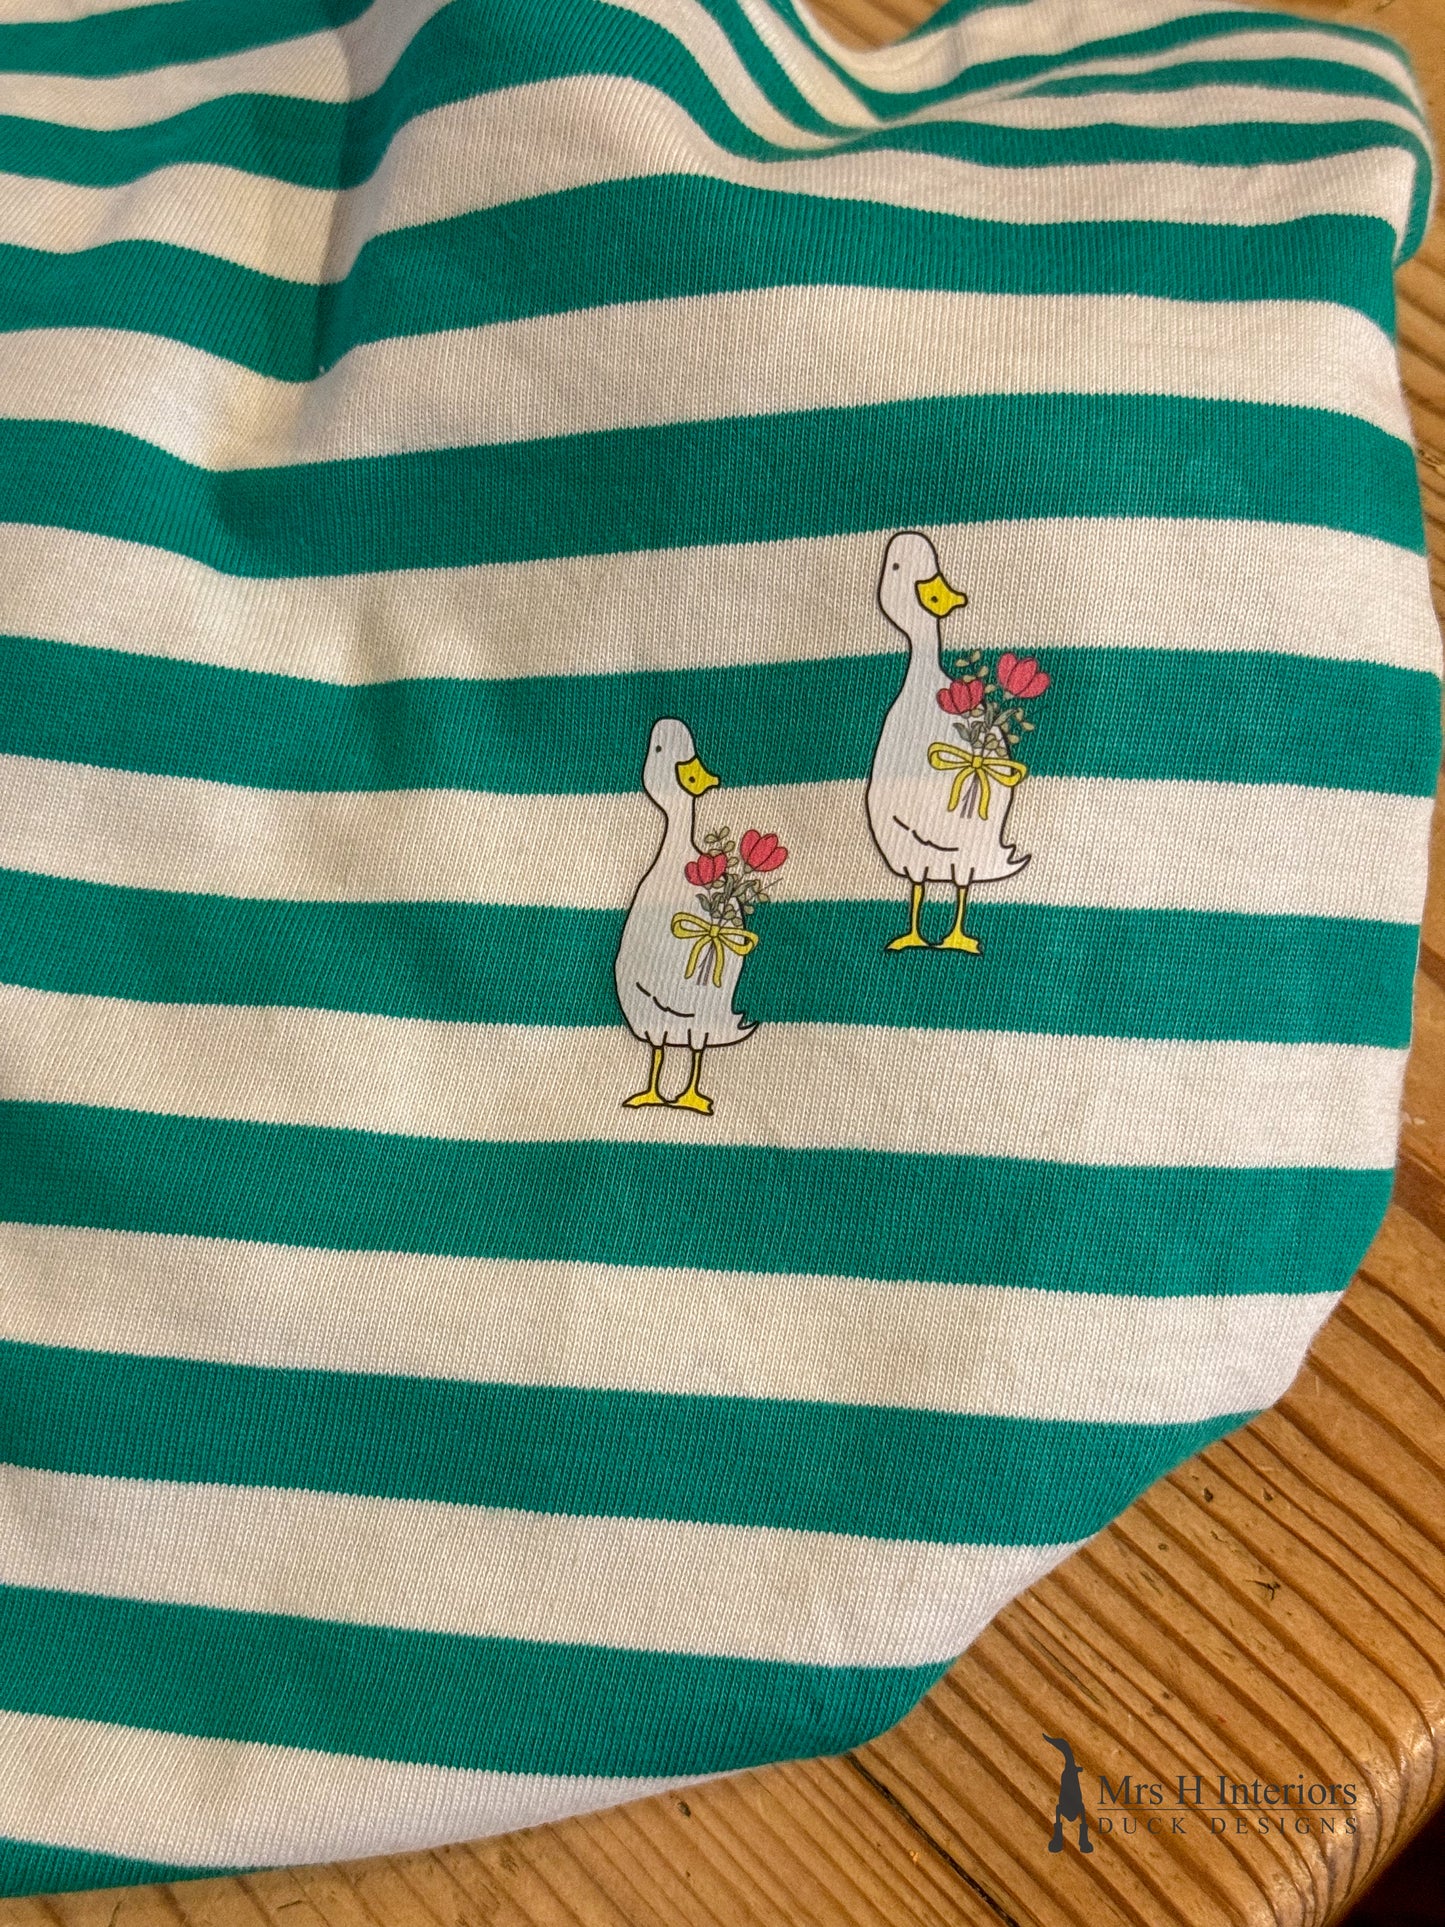 Duck clothing transfer